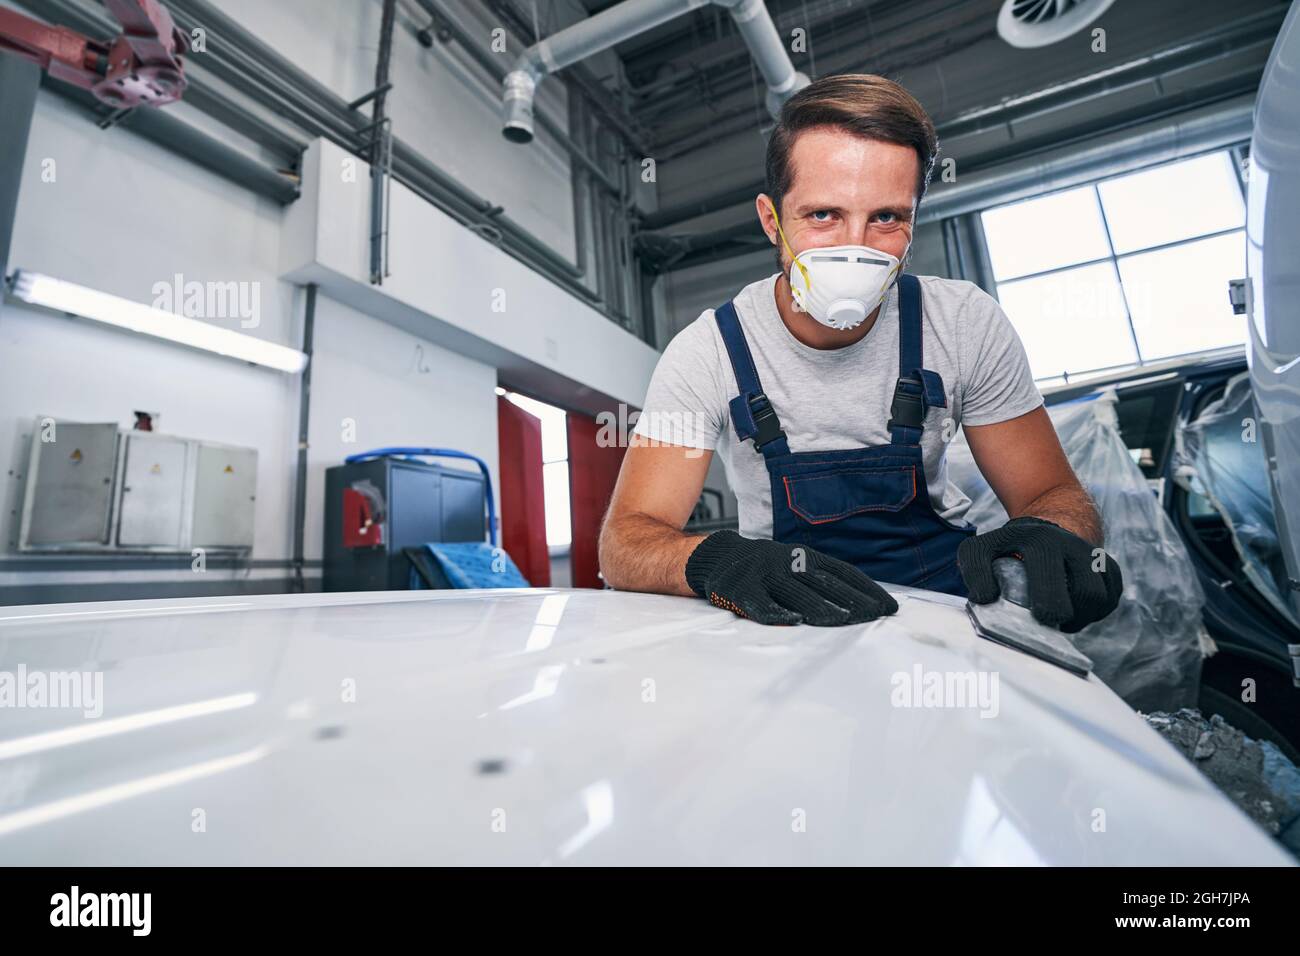 Cheerful auto technician leaning on car body part while sanding Stock Photo